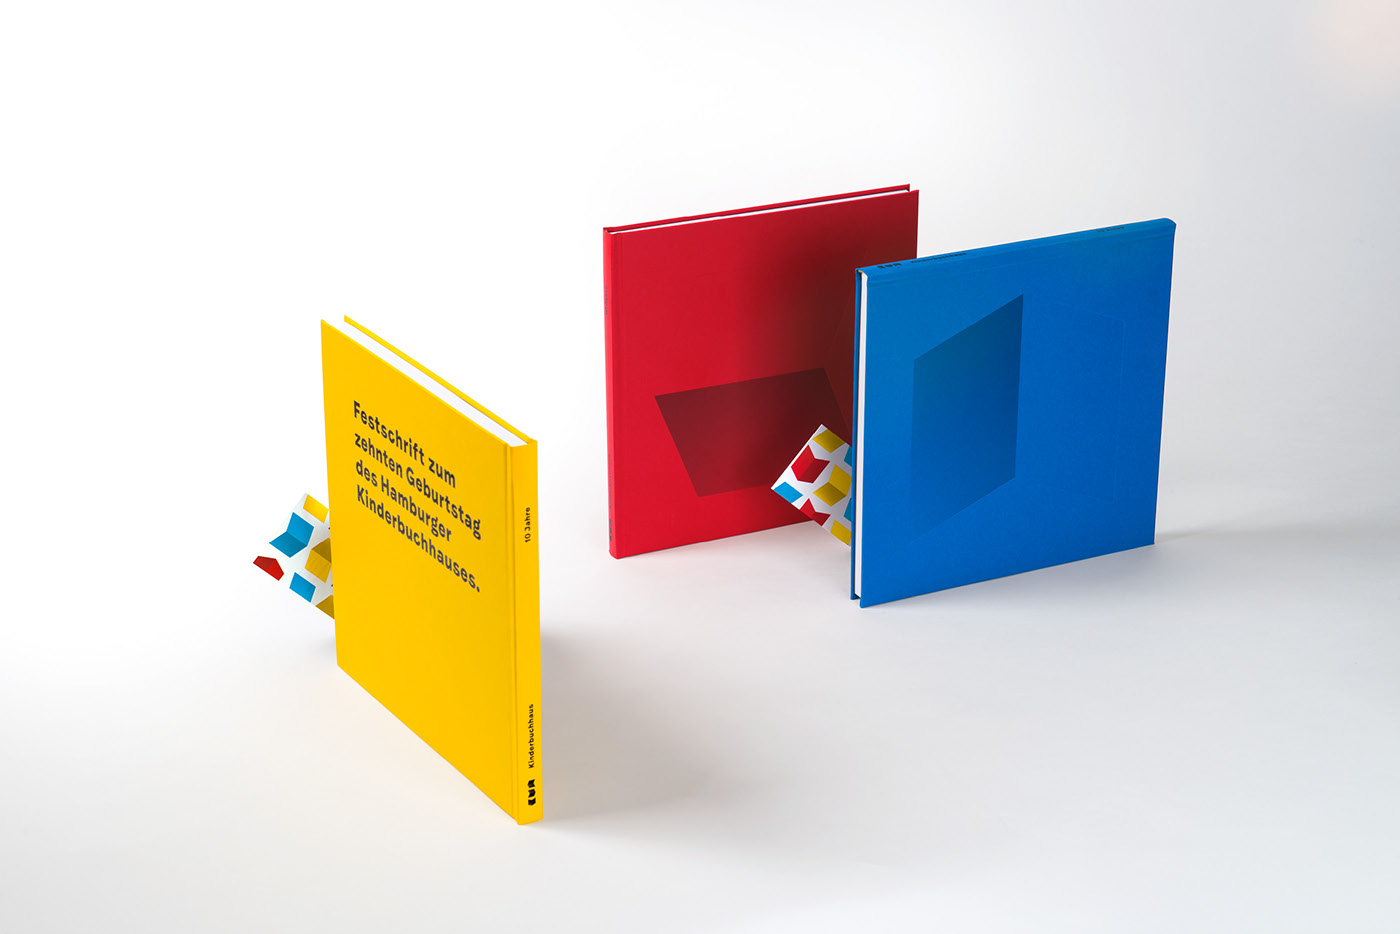 re-design Corporate Design museum art direction  Creative Direction  chidlren books red blue yellow